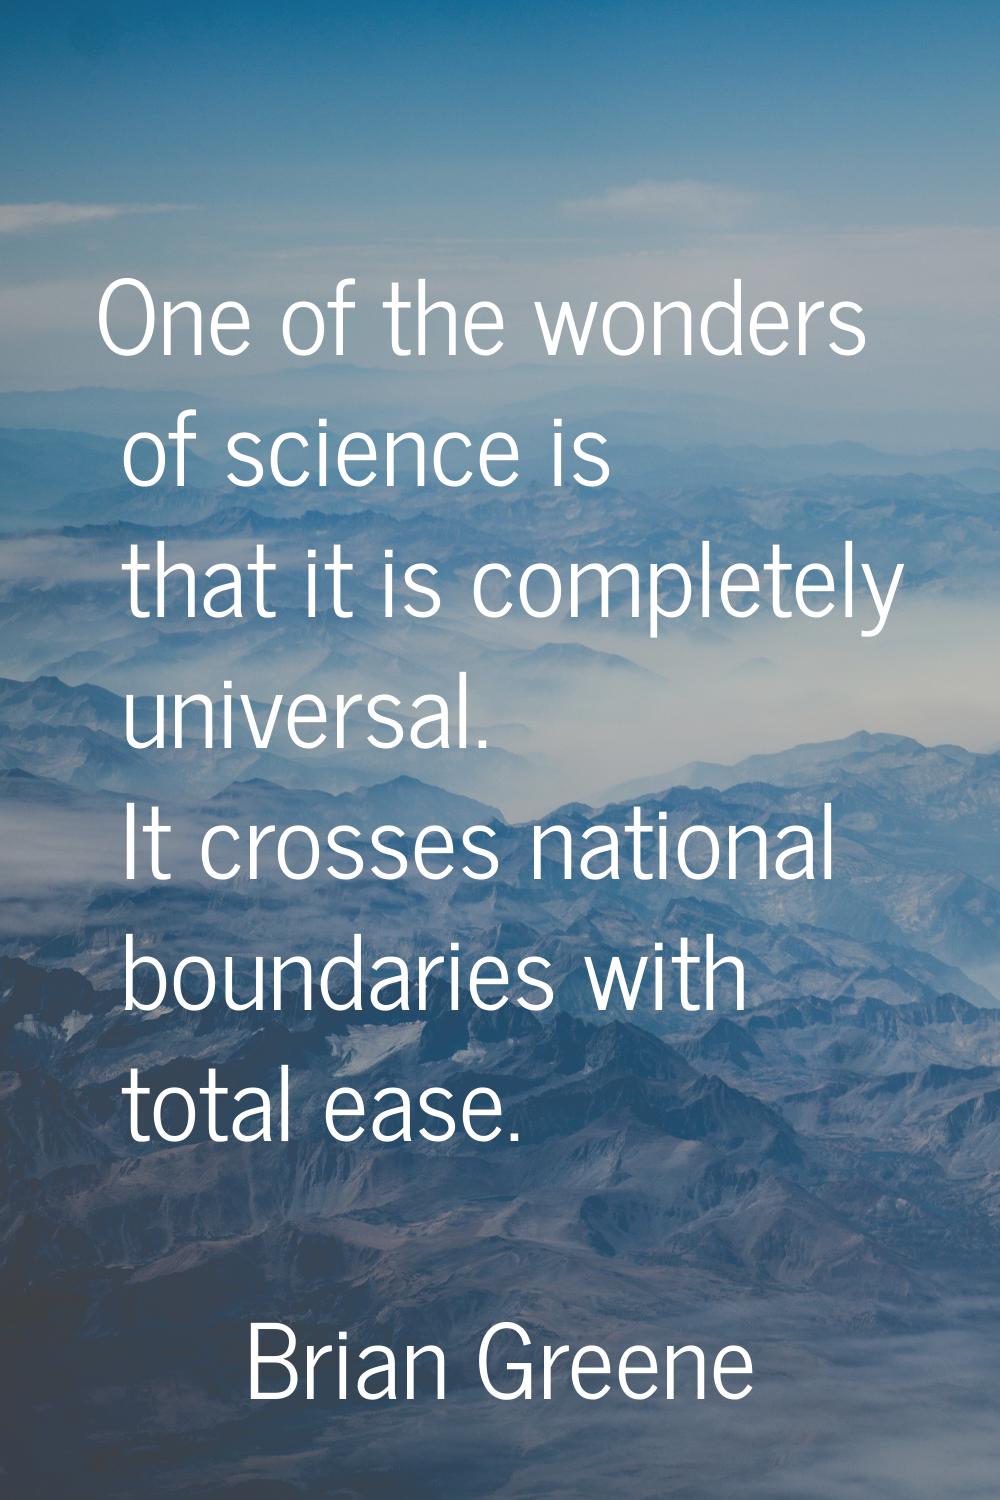 One of the wonders of science is that it is completely universal. It crosses national boundaries wi